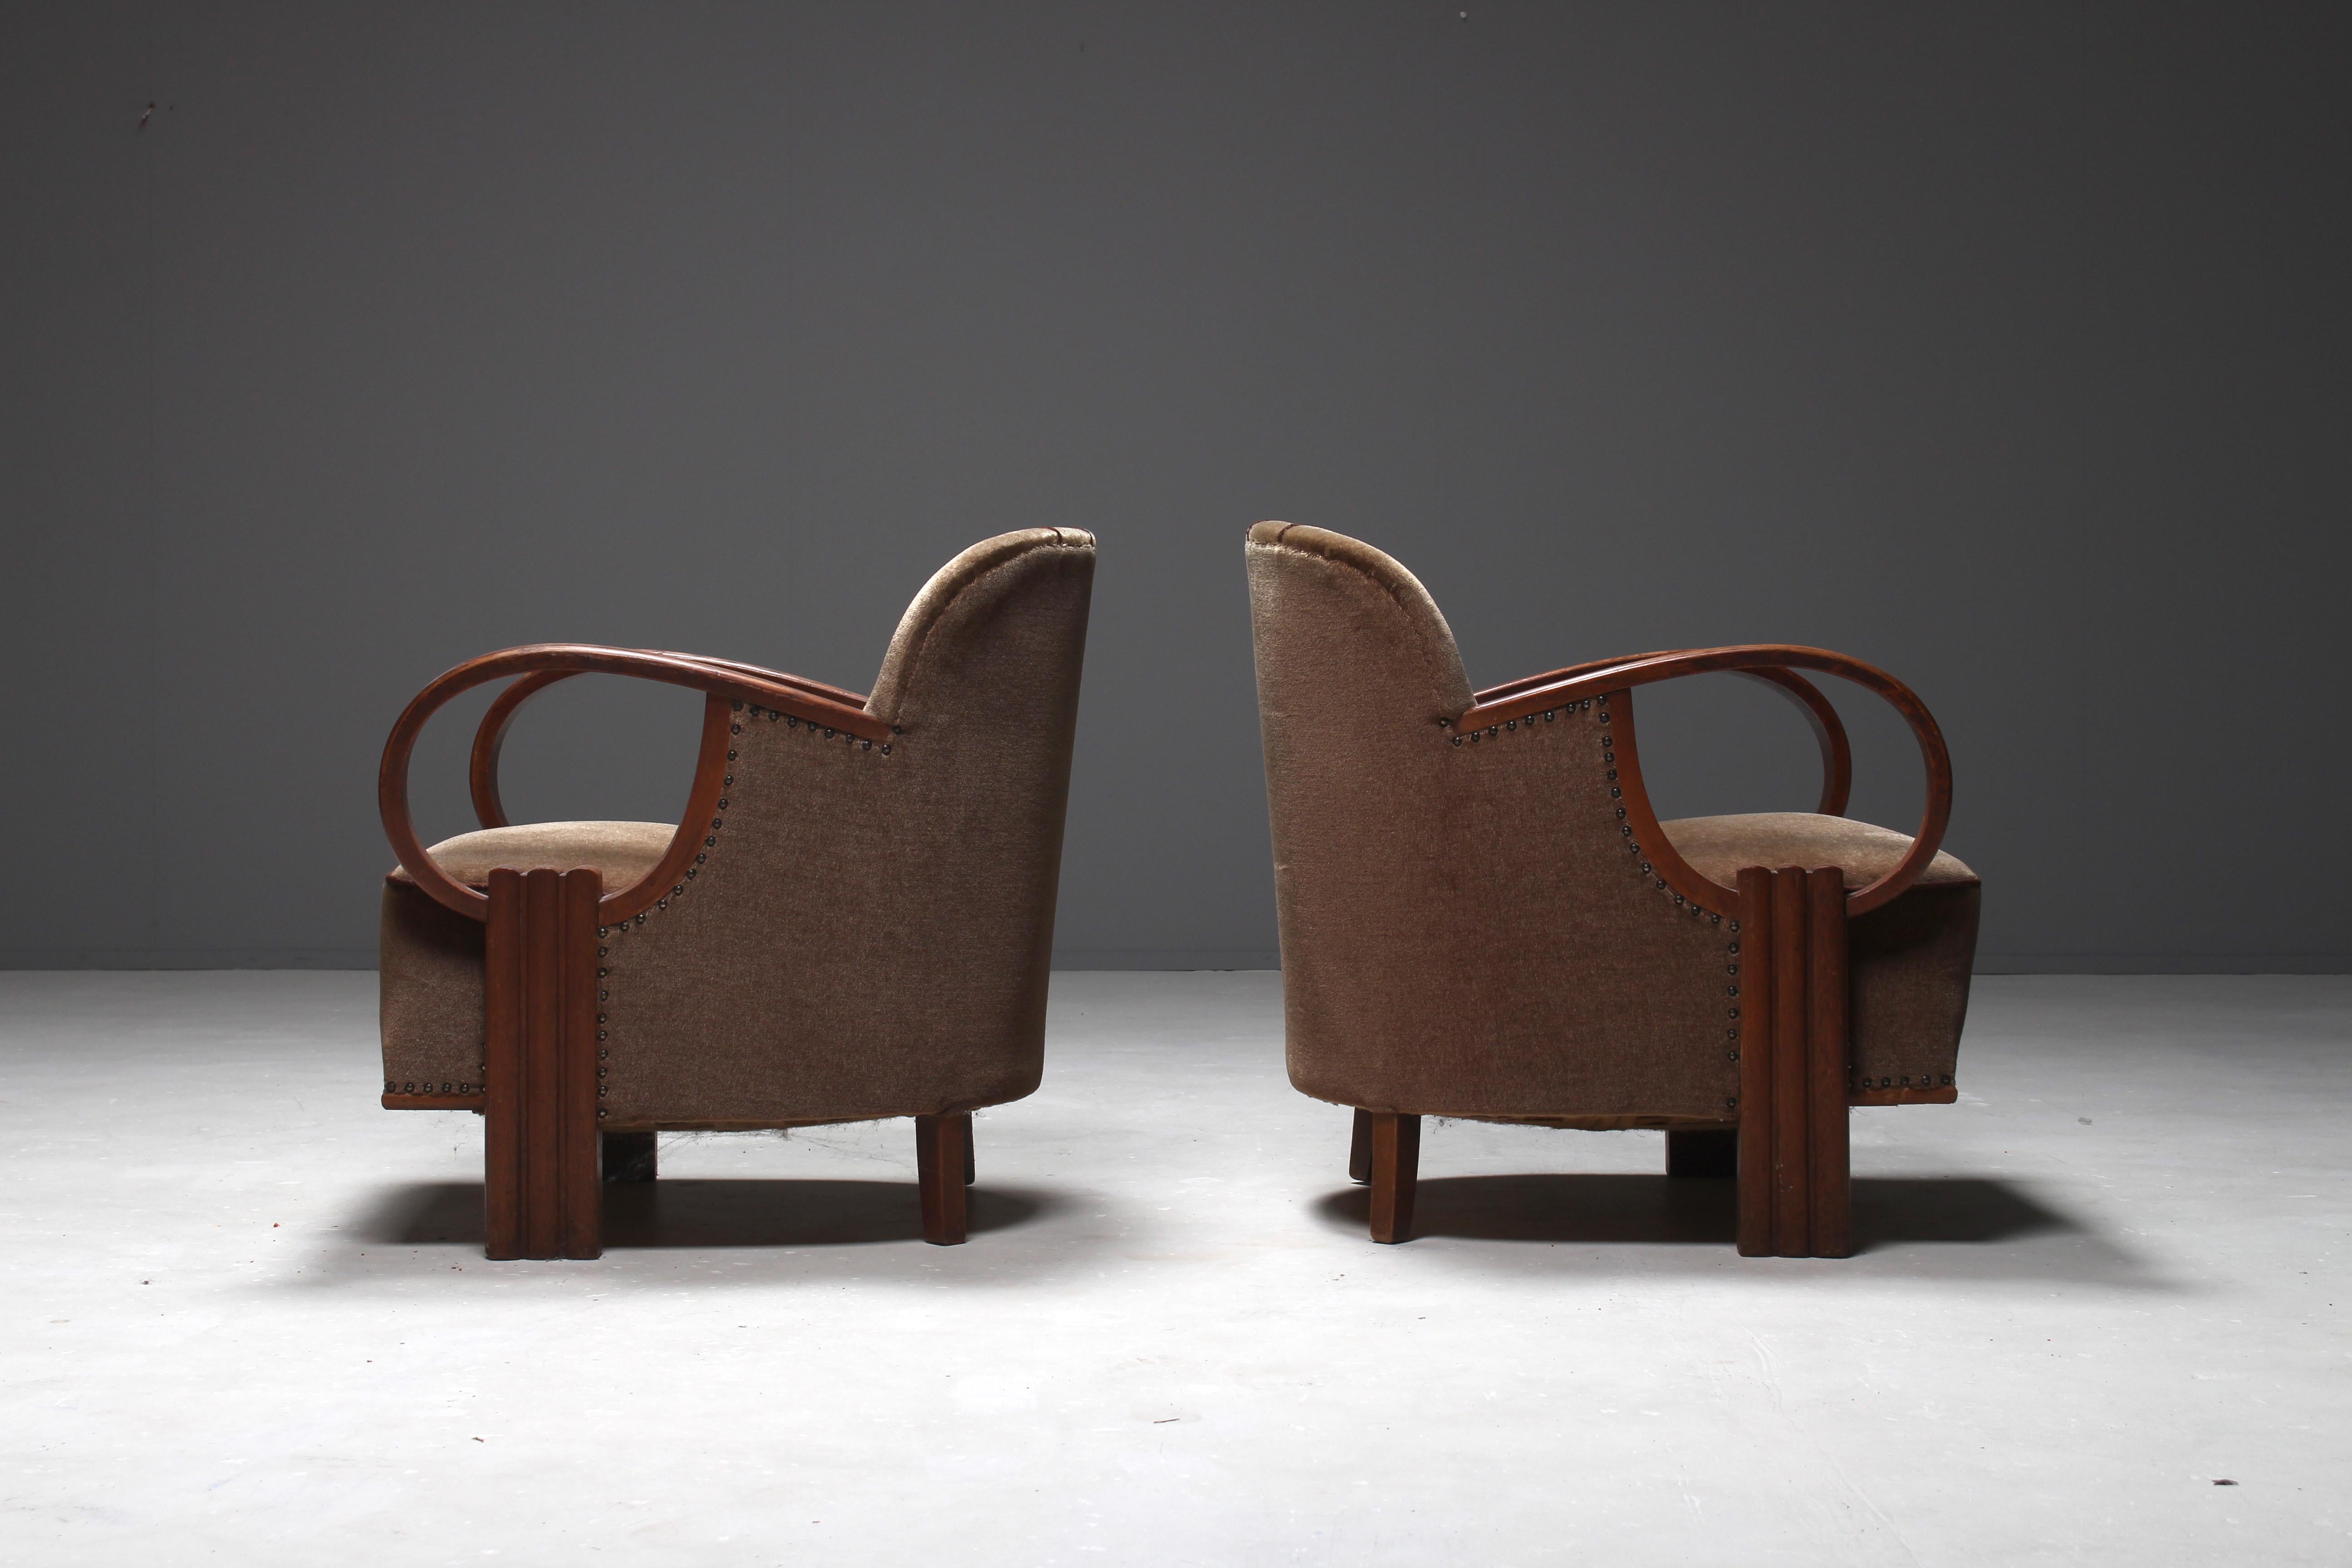 Pair of French Jean Pascaud Style Art Deco Club Chairs in Oak and Velvet, 1930s For Sale 4